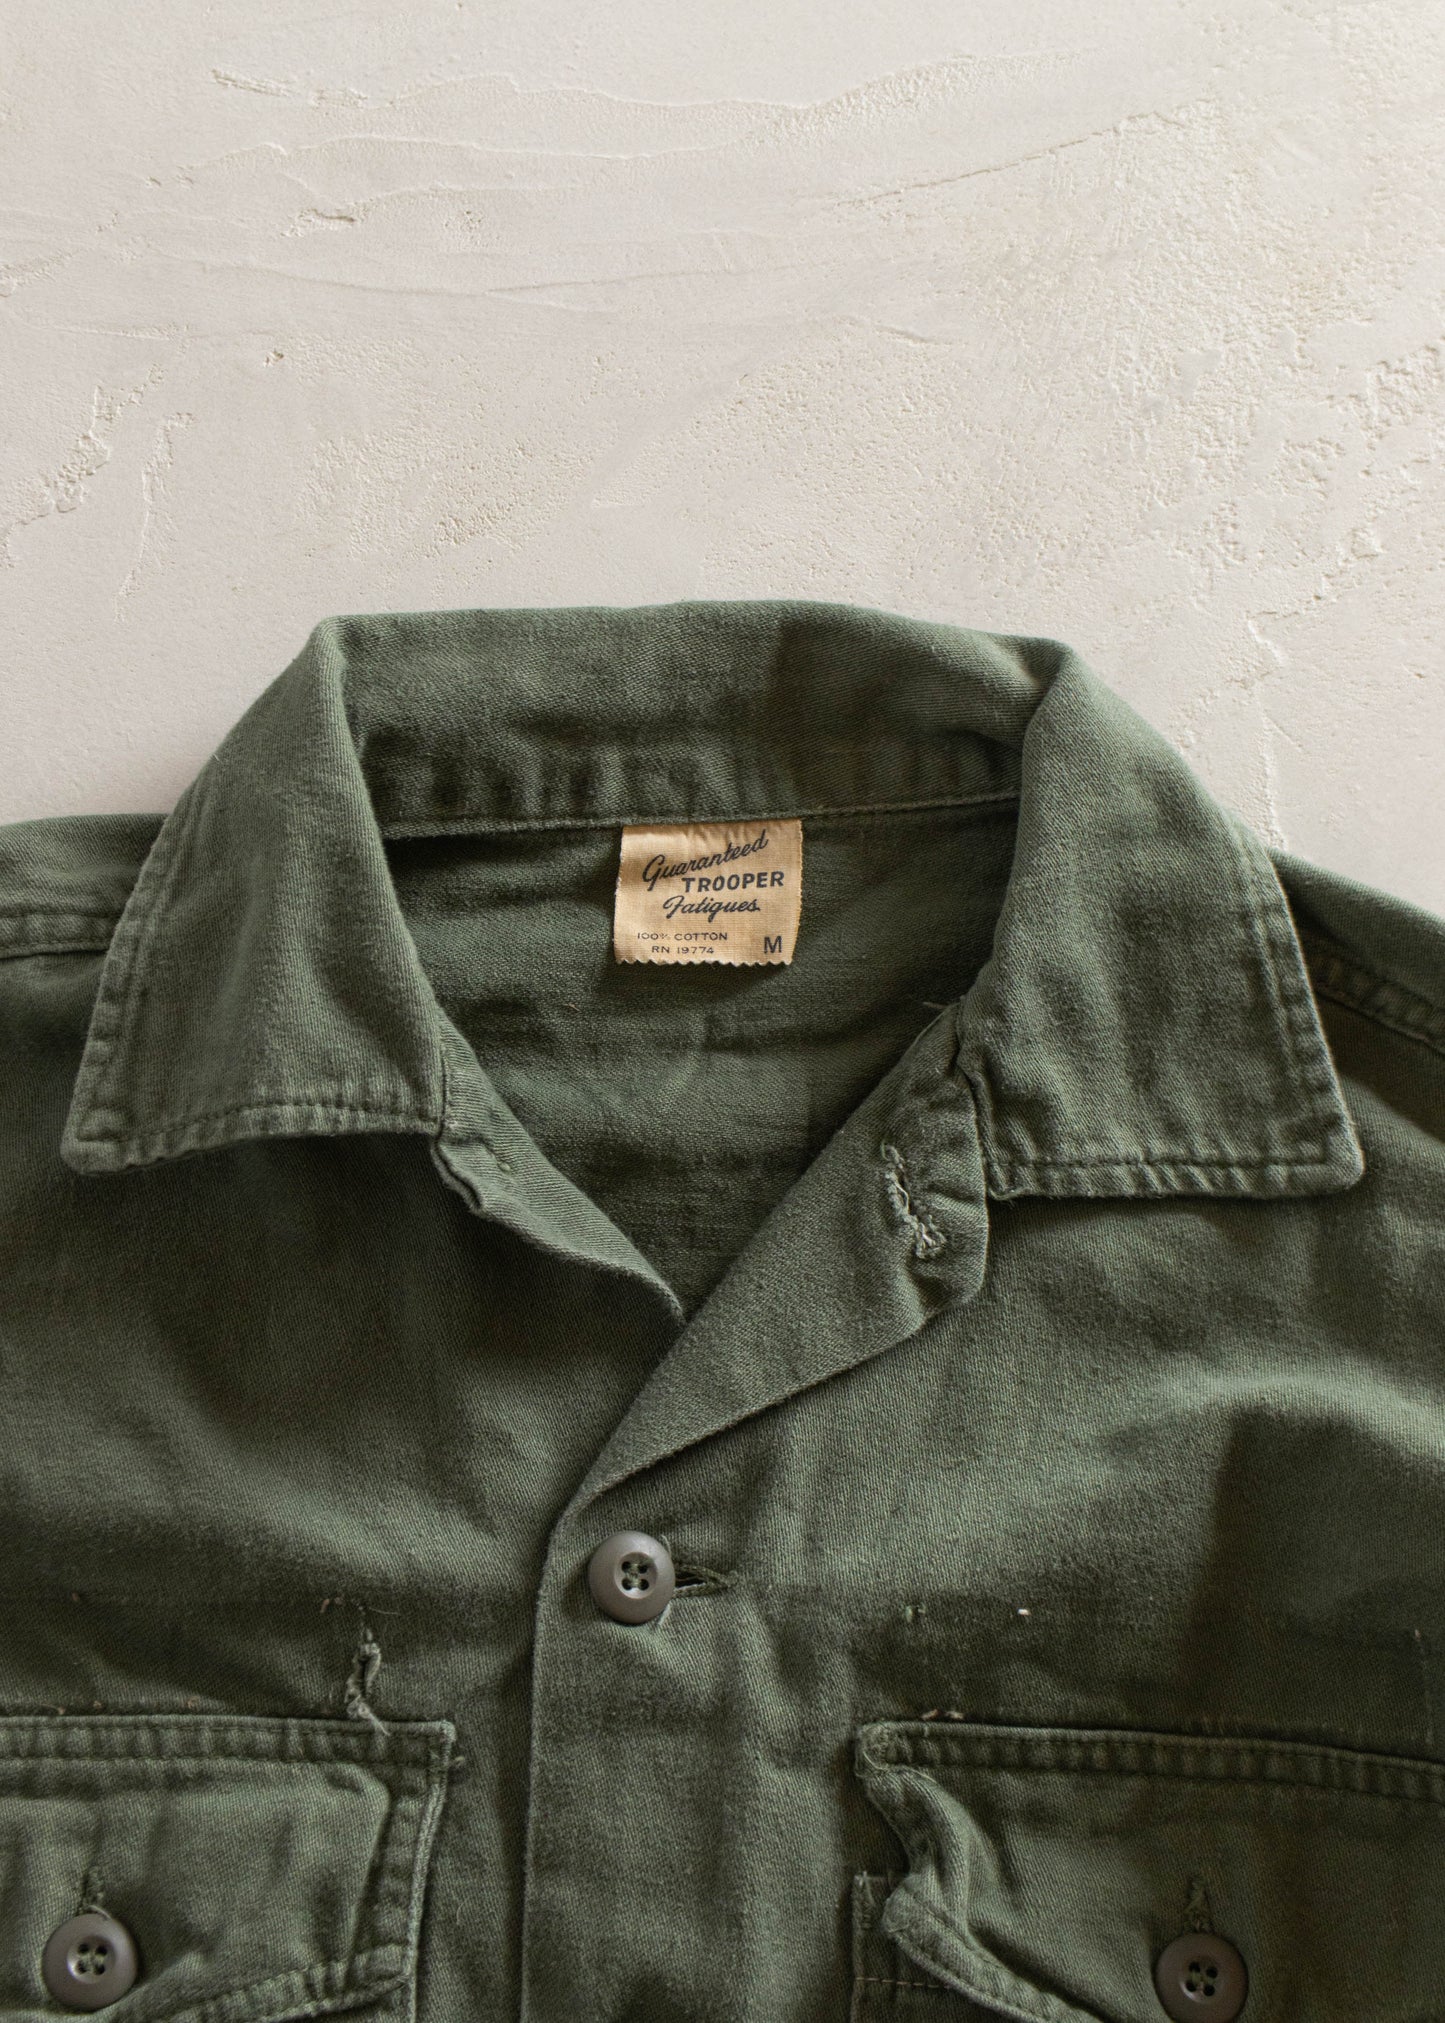 1970s Guarenteed Trooper Fatigues OG 107 Type lll Fatigue Shirt Size S/M